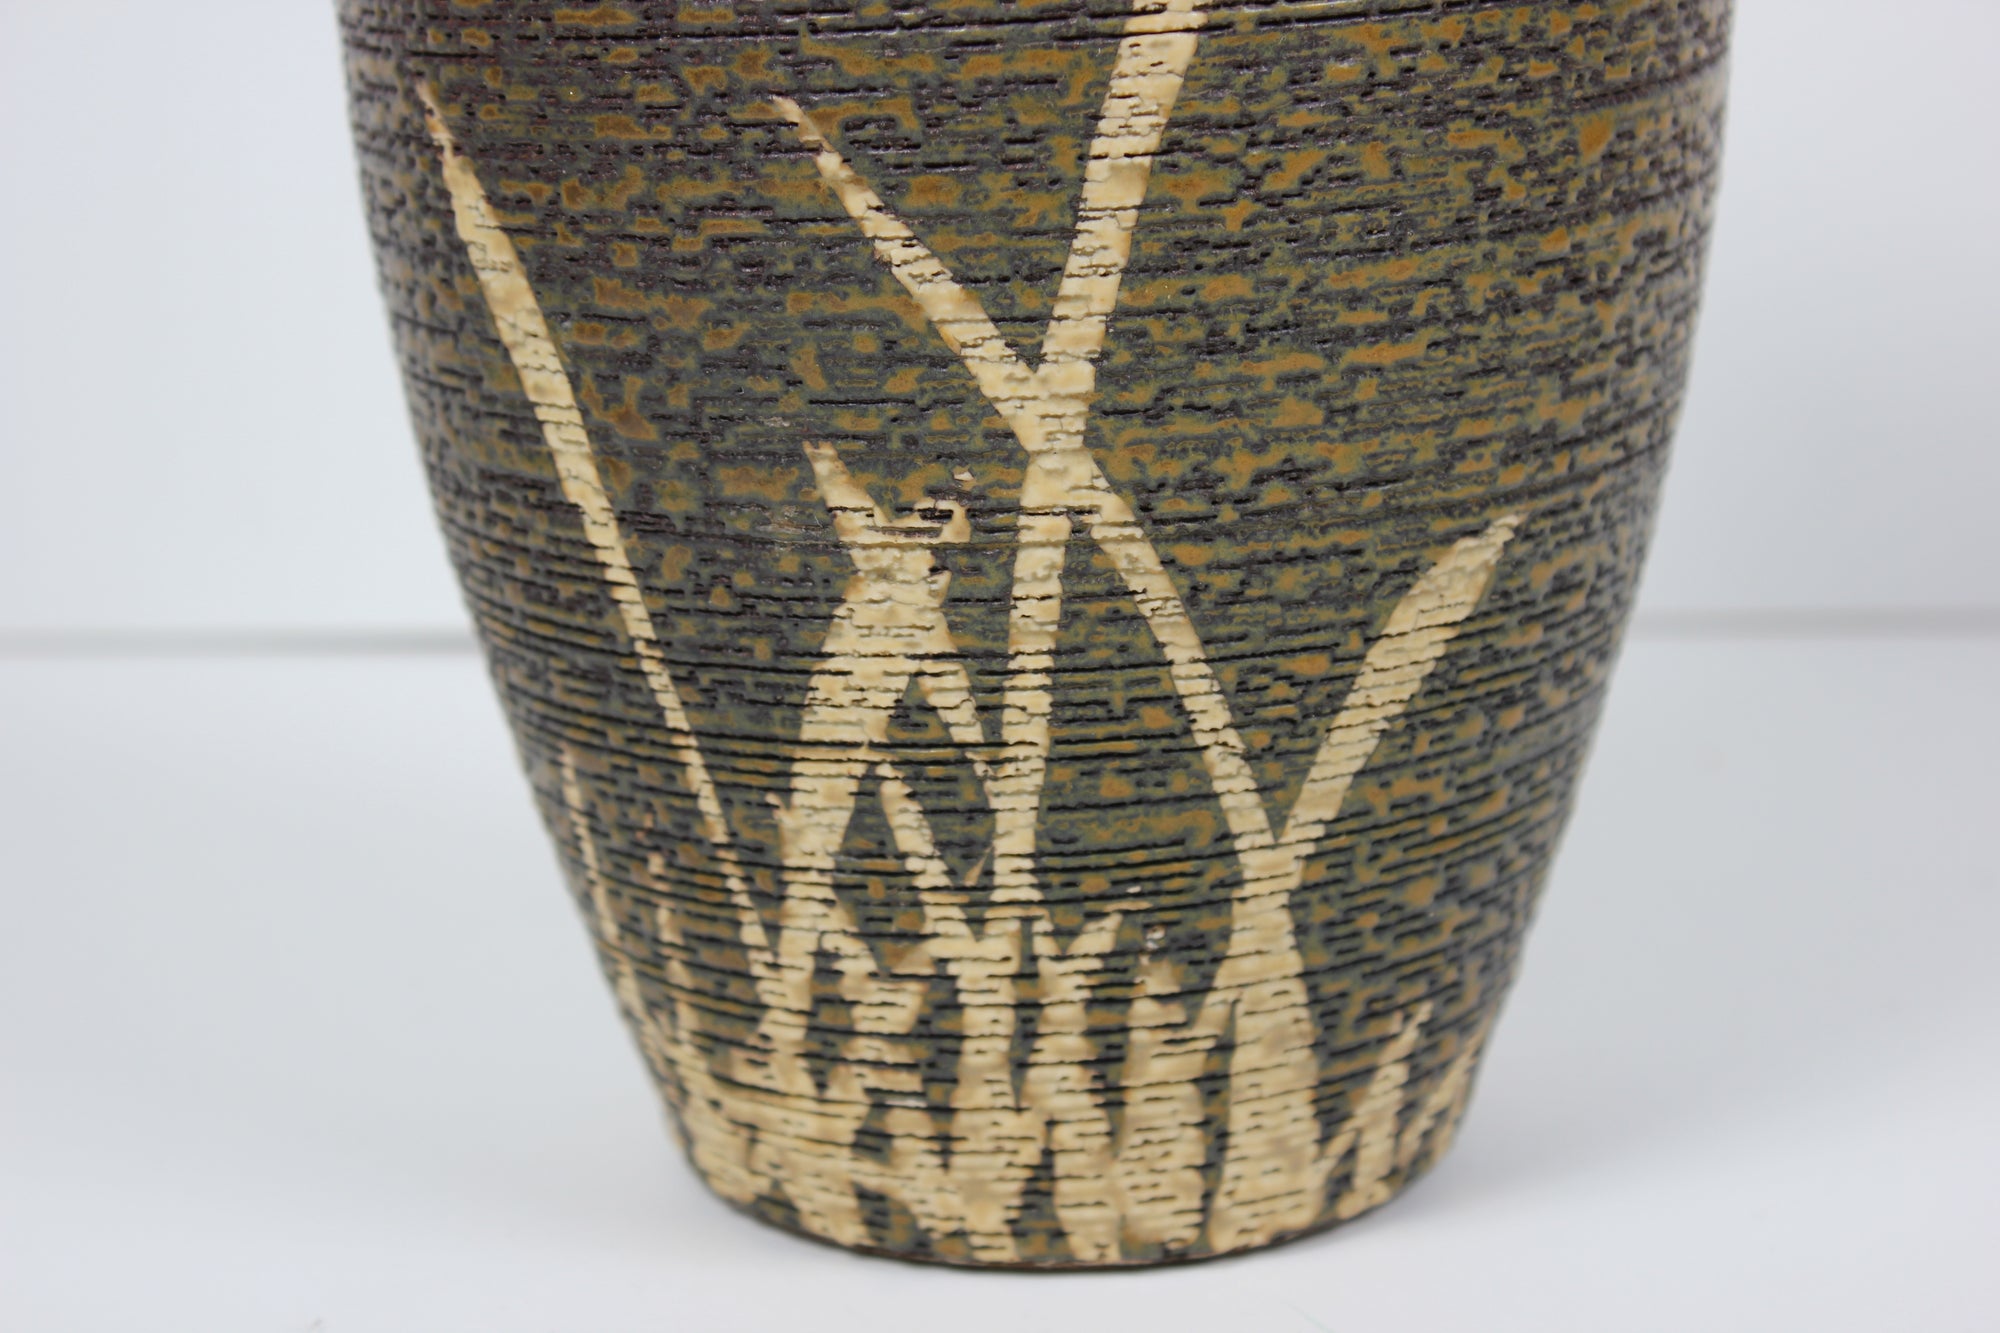 Brown Ceramic Vessel With Gray Texture And Cream Accent Lines <br><br>#98543